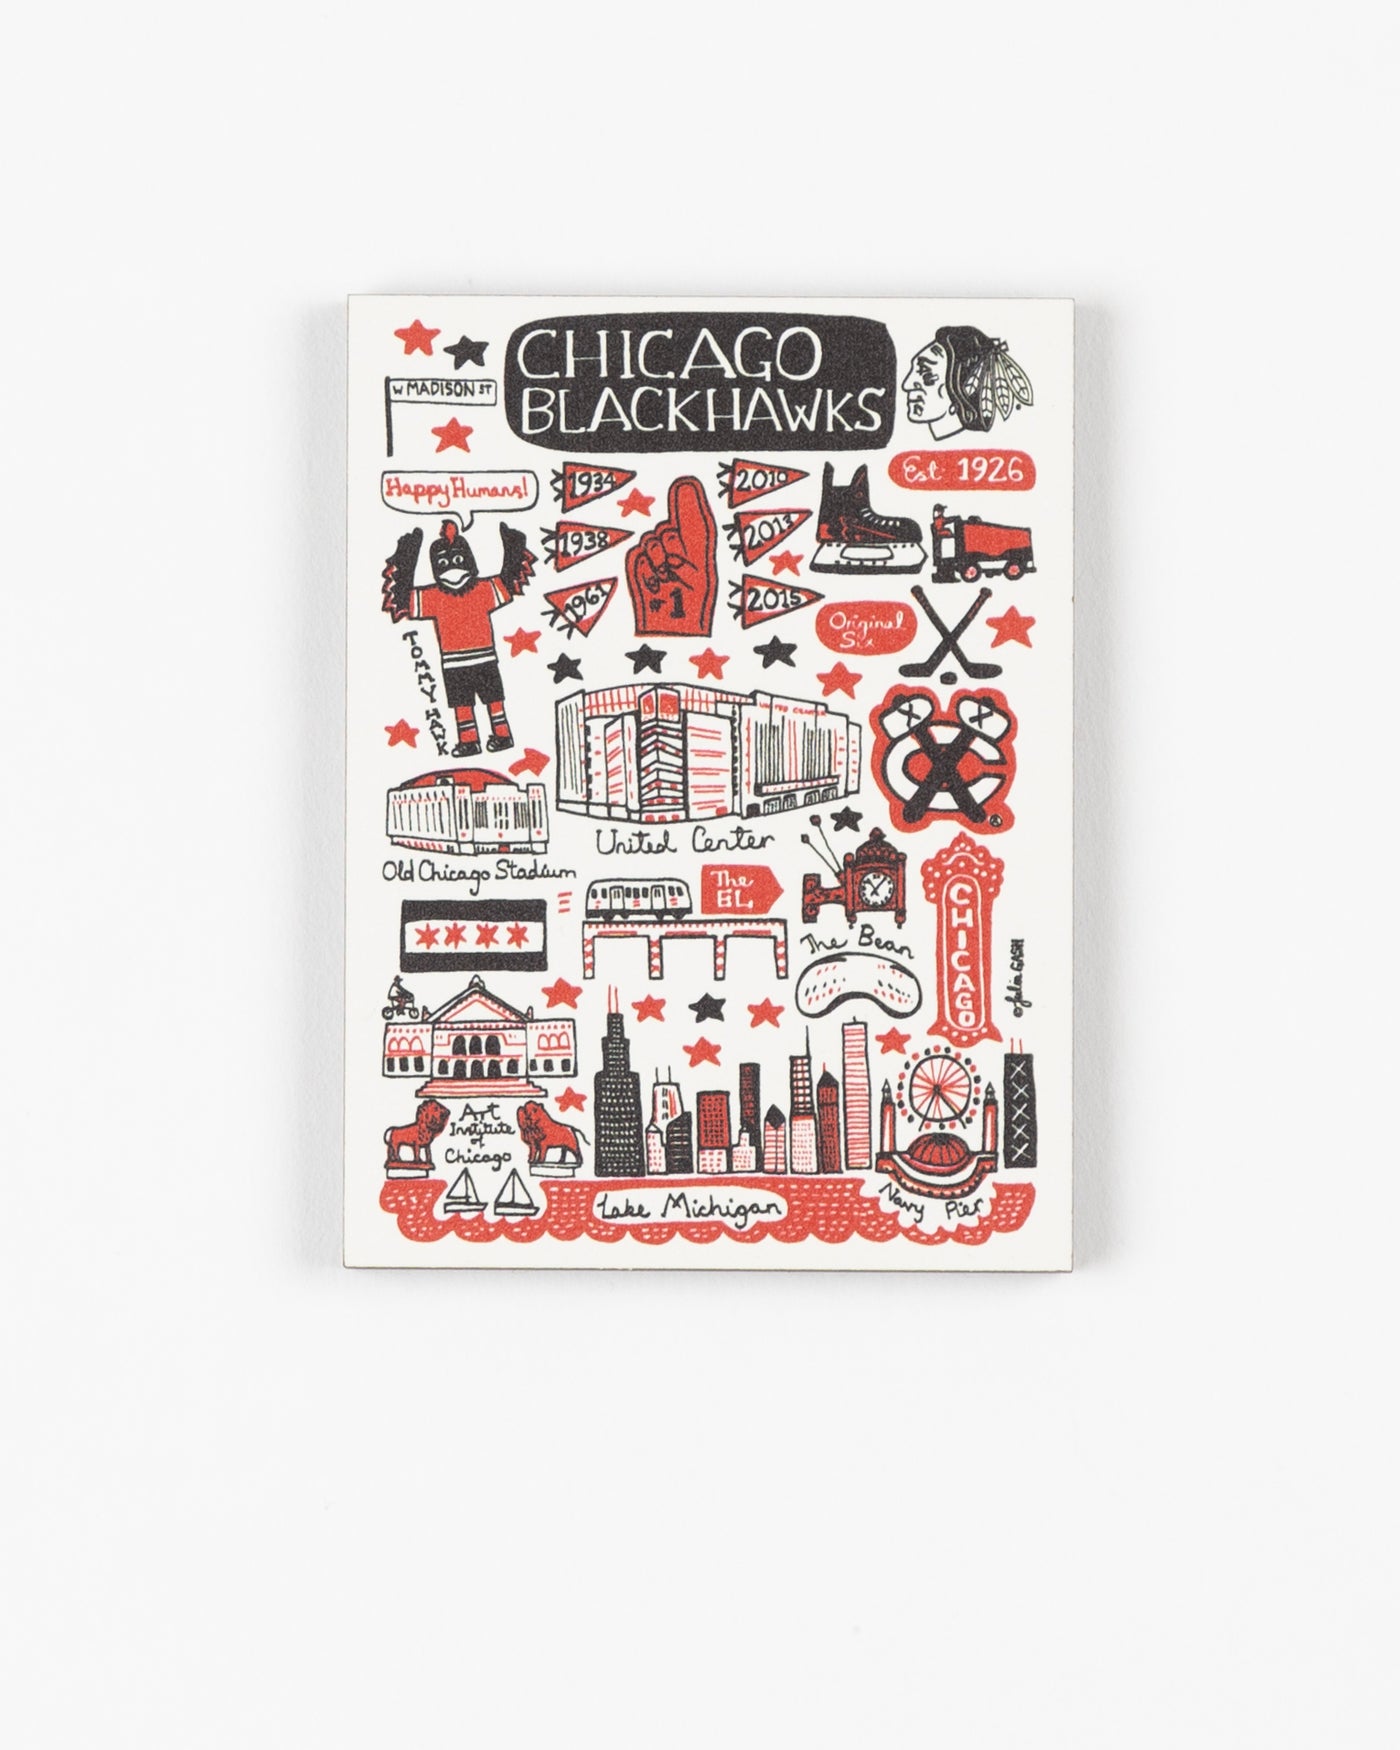 Julia Gash artwork inspired by Chicago and Chicago Blackhawks on wooden magnet - front lay flat